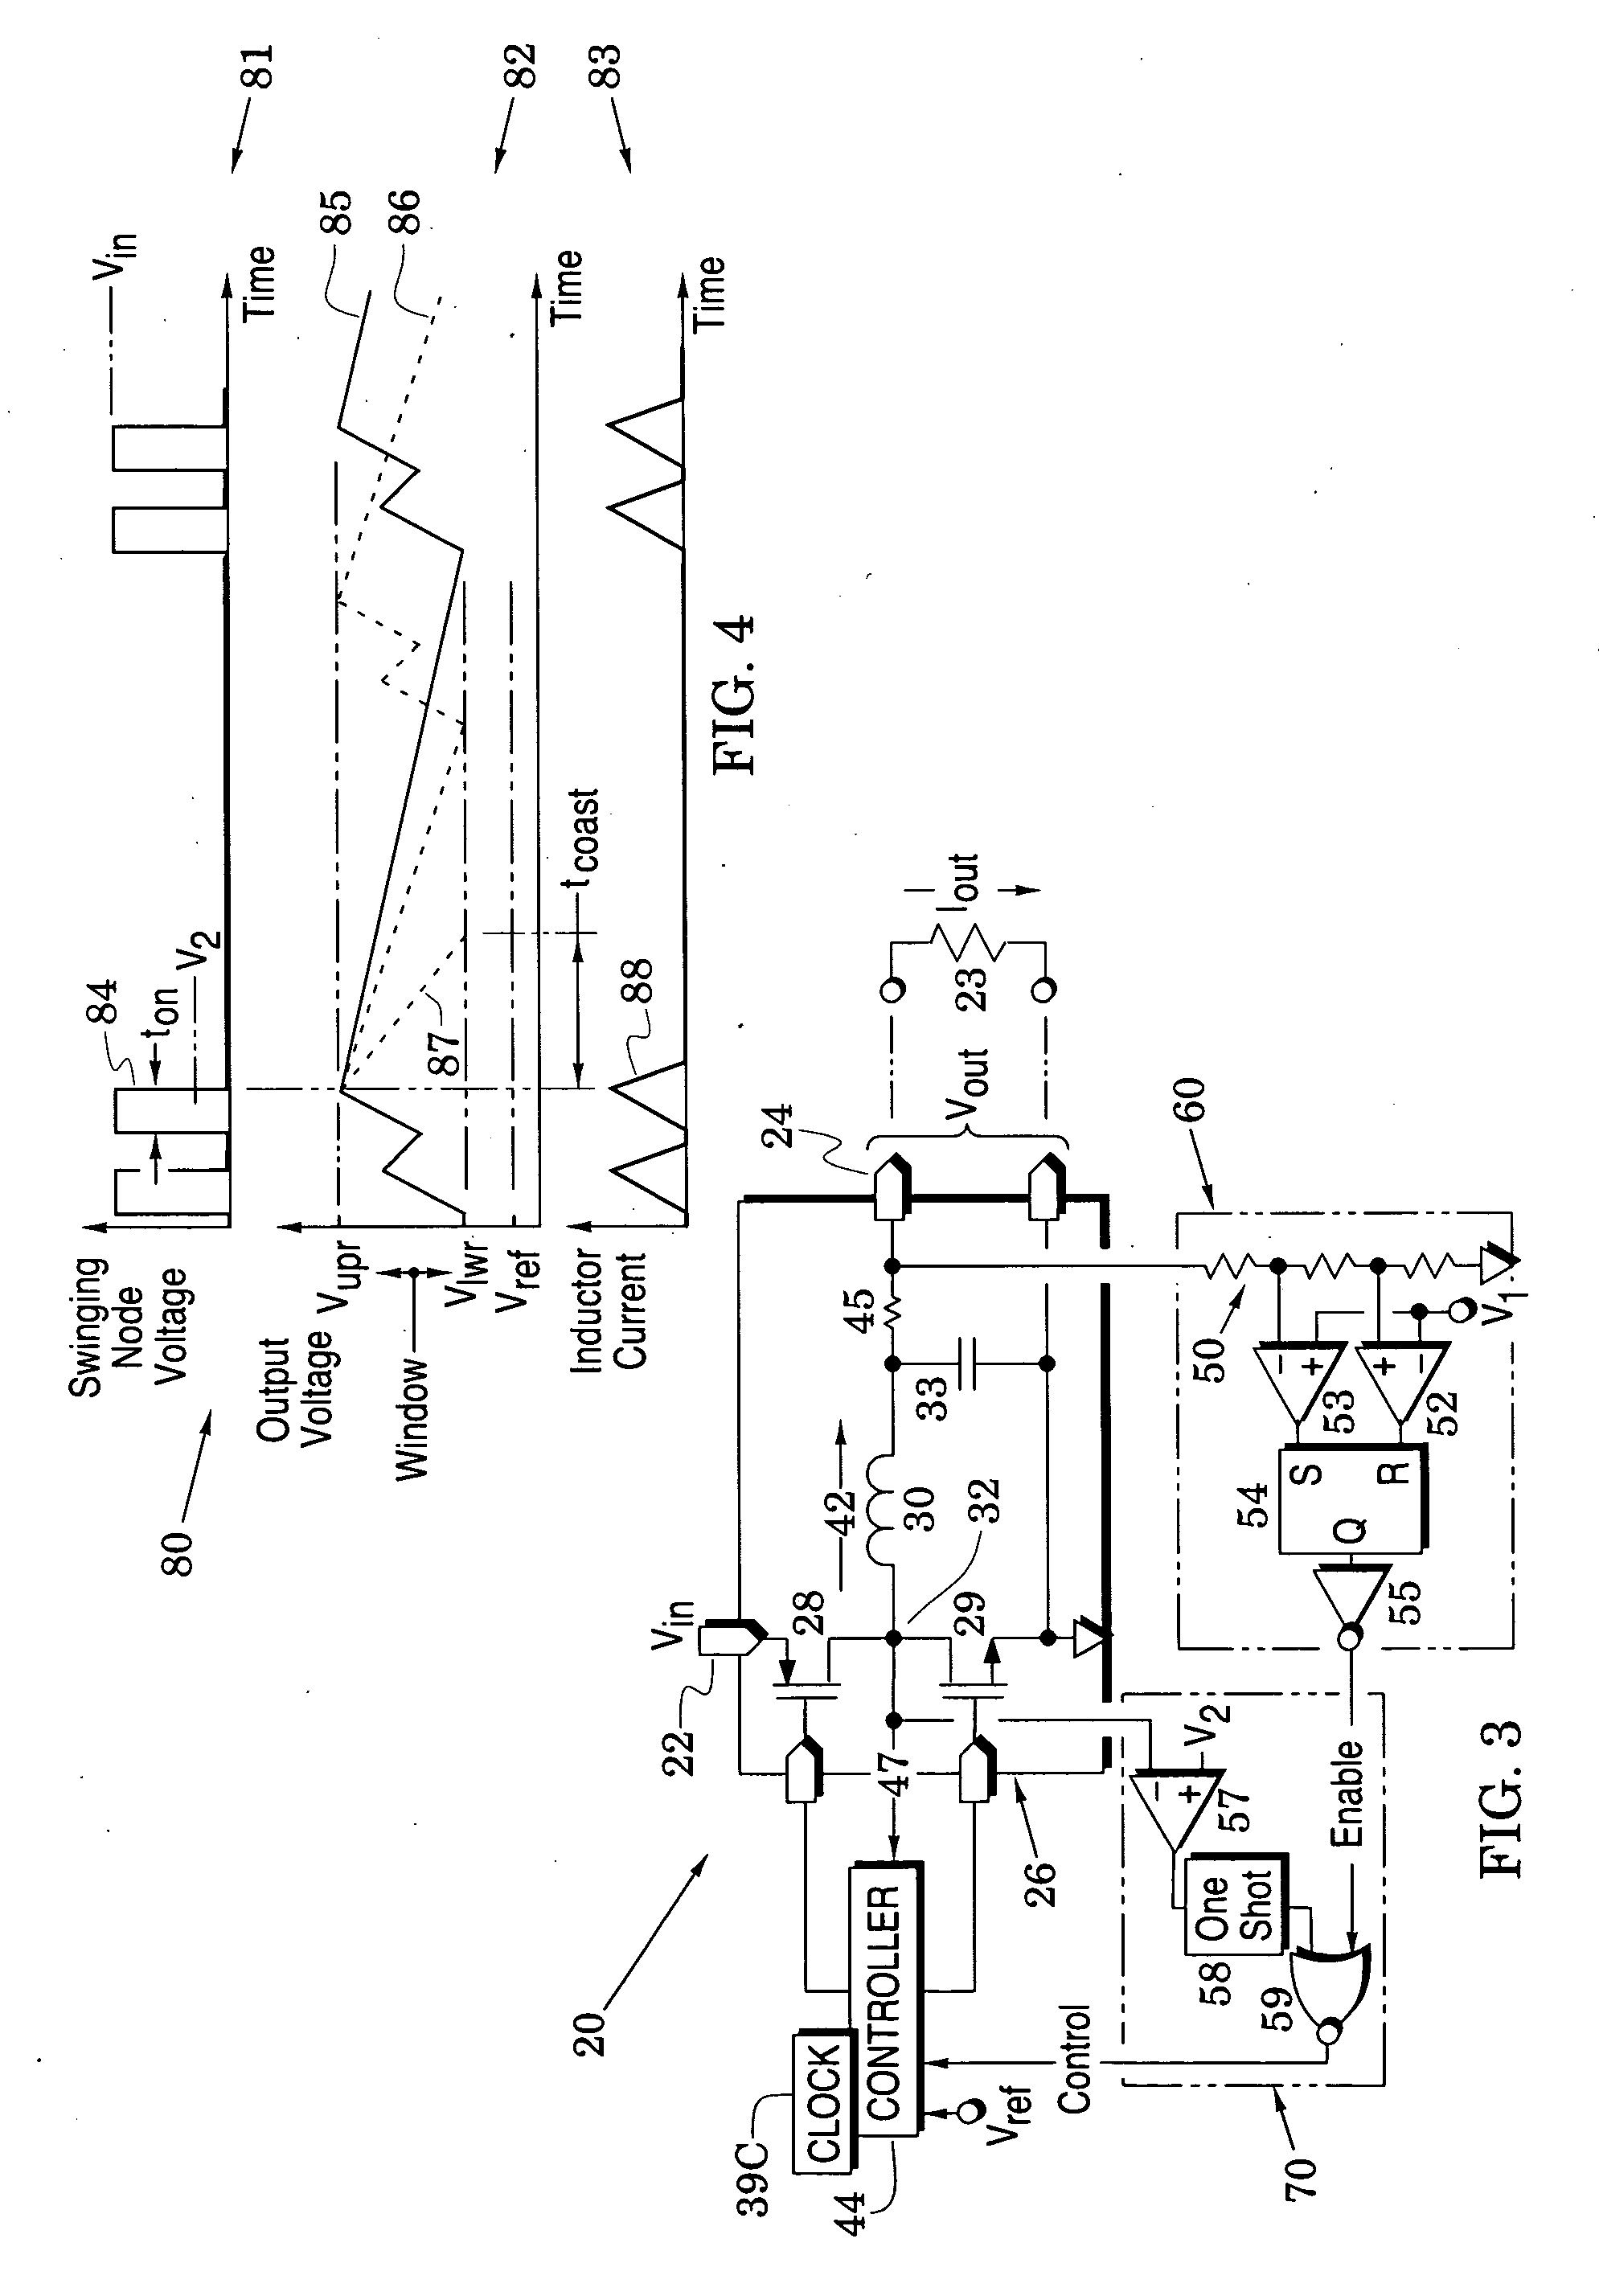 Switching converters with efficiently-controlled mode transitions